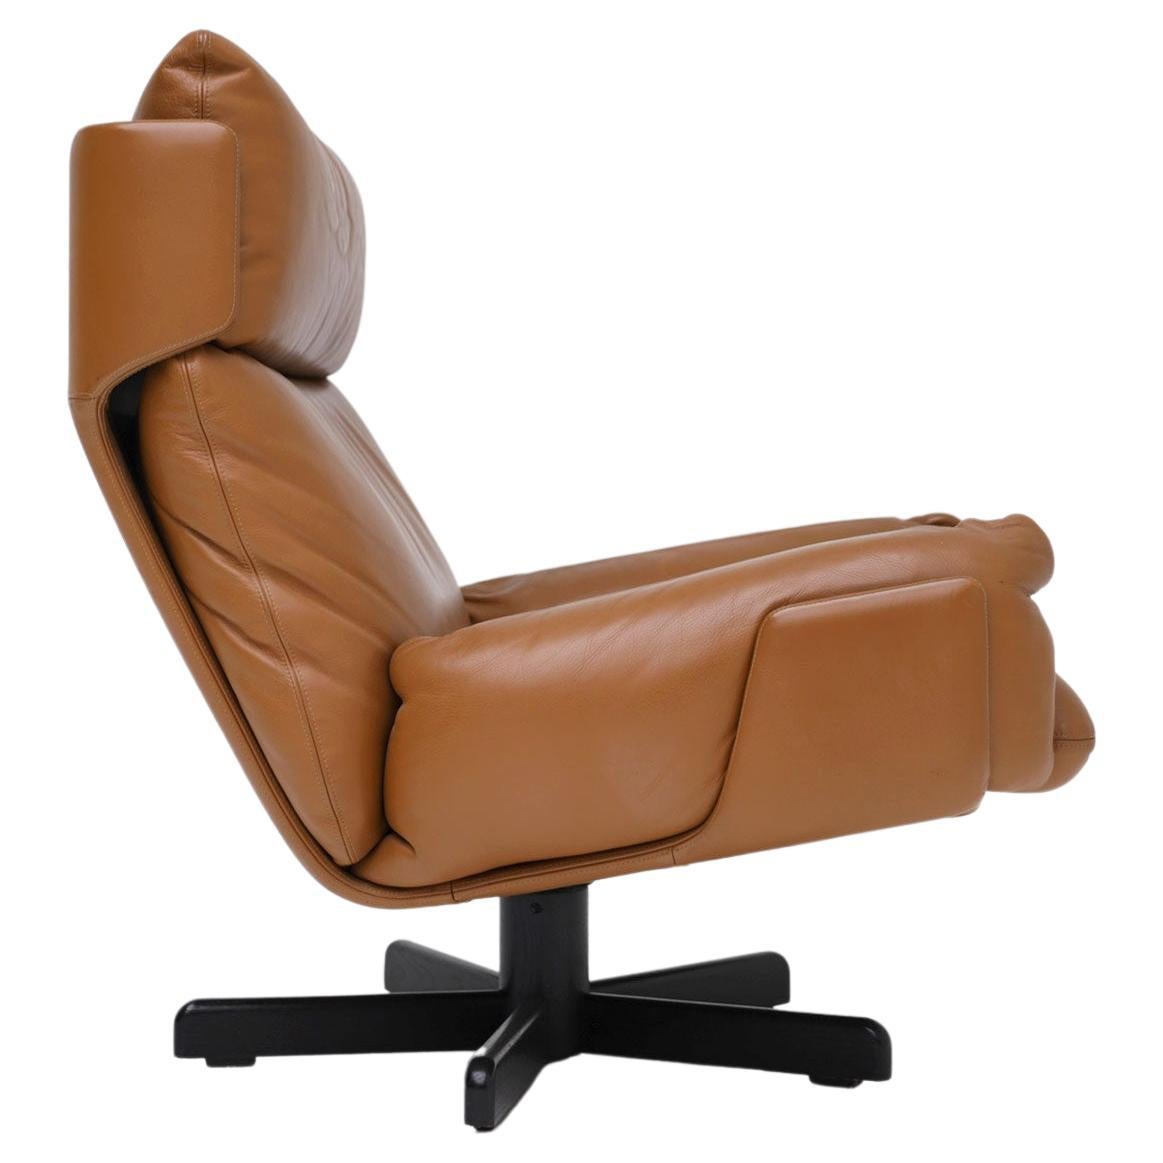 Durlet Lounge Chair 1976 Heiner Golz with Wood Base and Leather Seat